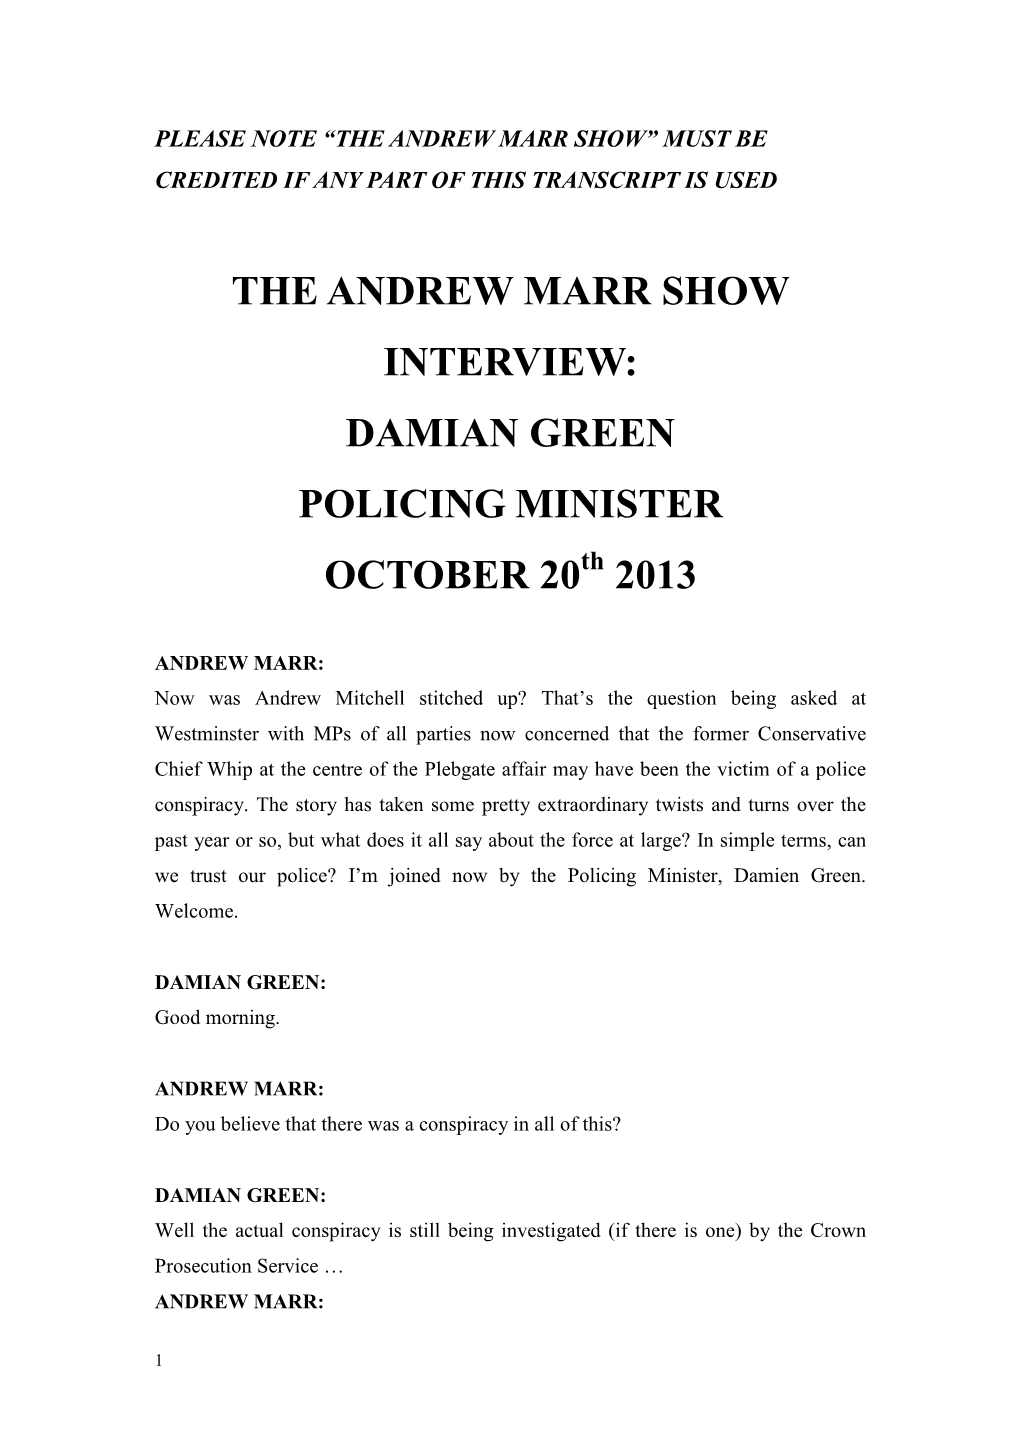 THE ANDREW MARR SHOW INTERVIEW: DAMIAN GREEN POLICING MINISTER OCTOBER 20Th 2013